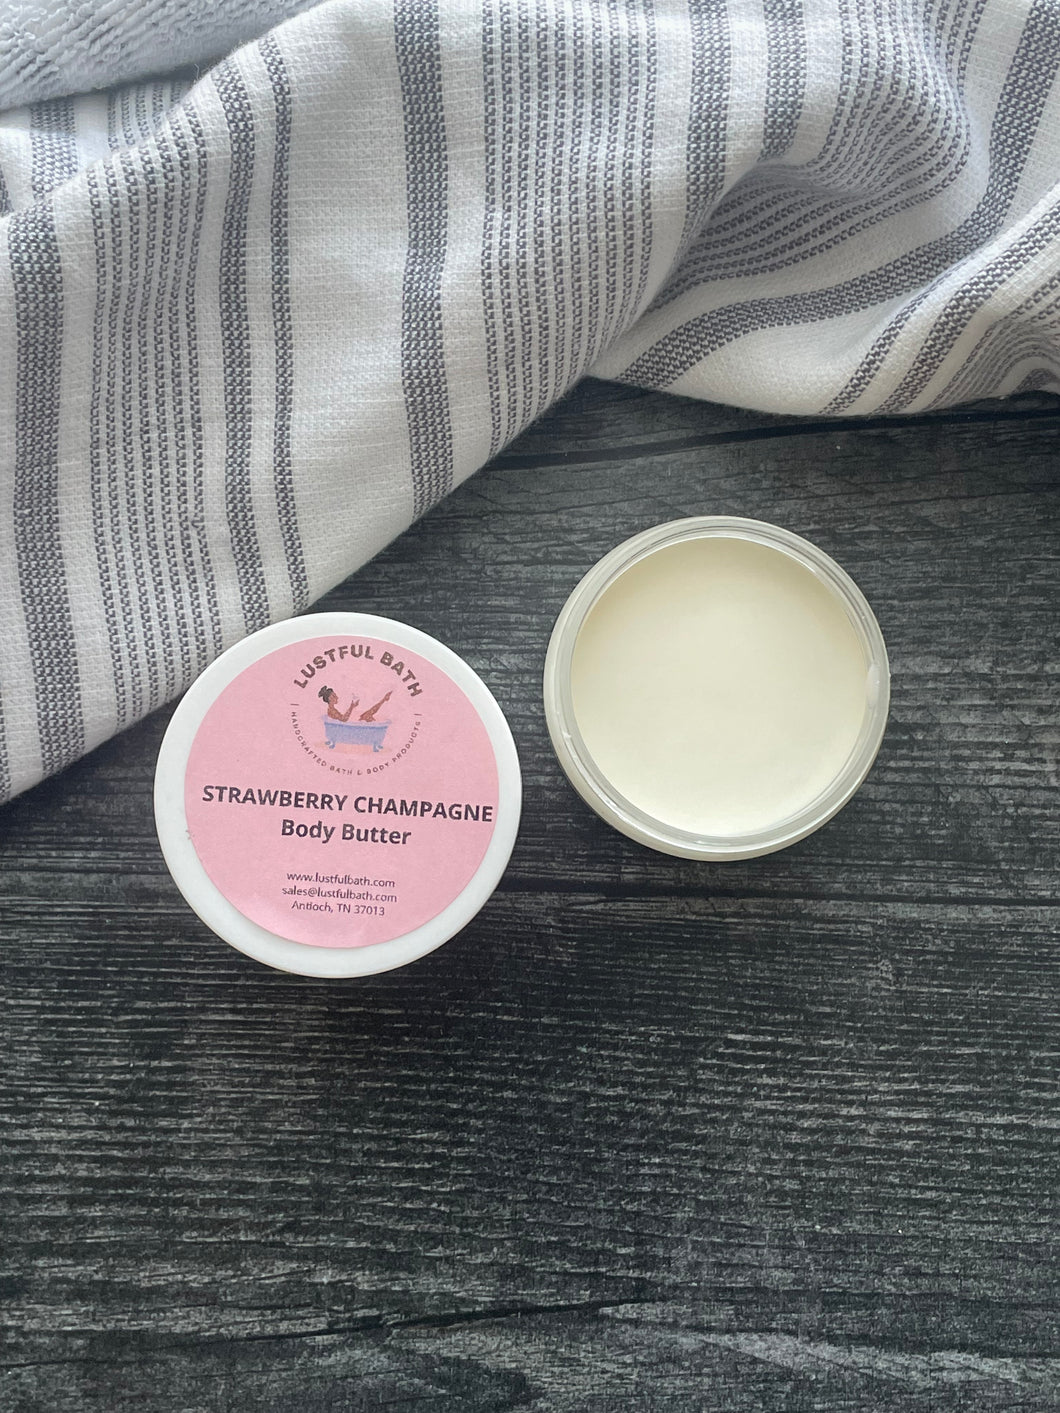 STRAWBERRY CHAMPAGNE BODY BUTTER